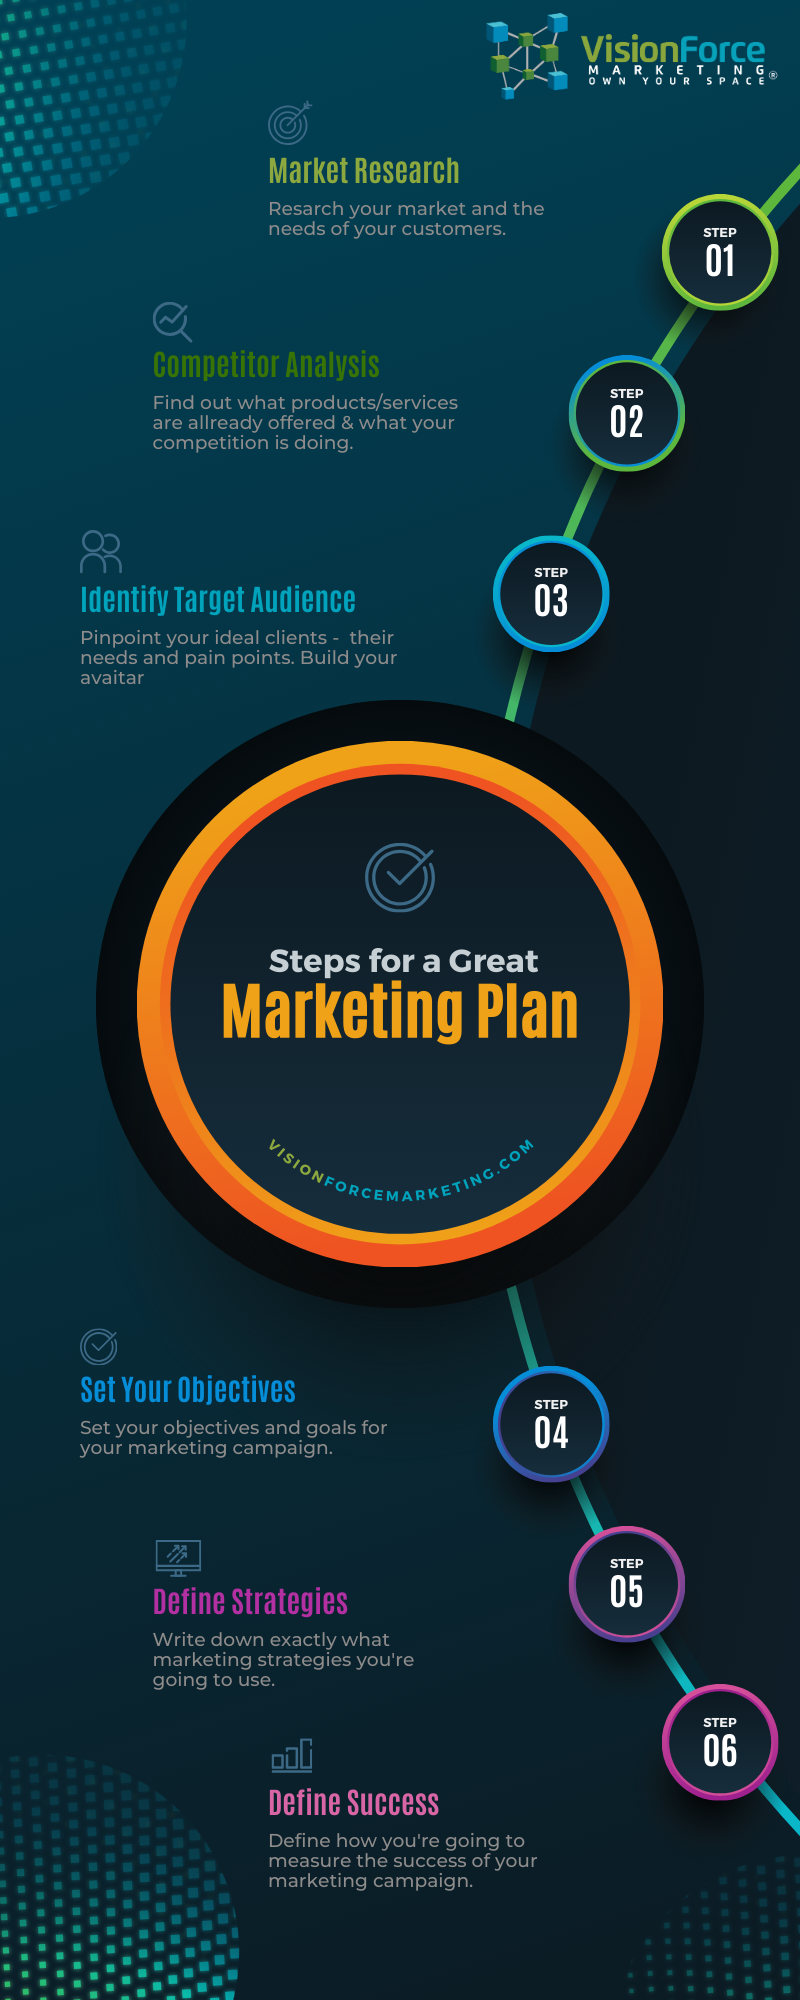 Vision Force Marketing Plan Infographic